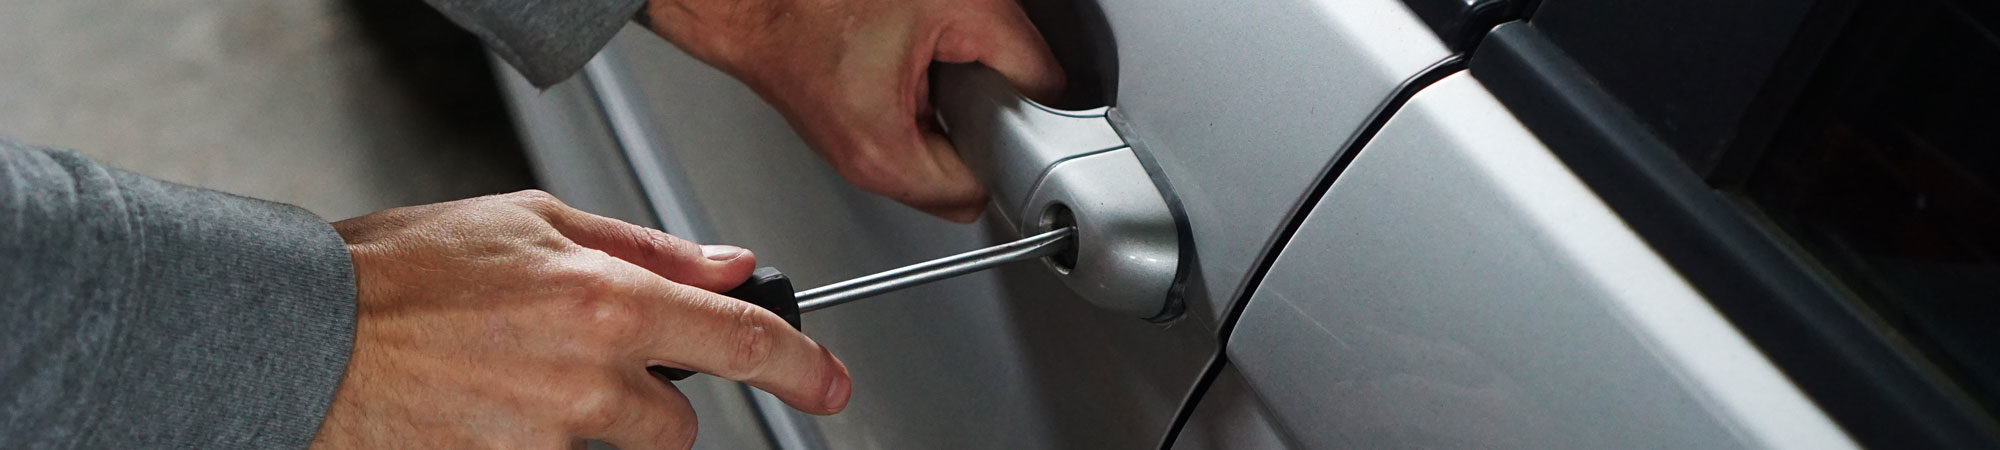 A close-up of a person's hands using a screwdriver to remove a screw from a car door hinge.